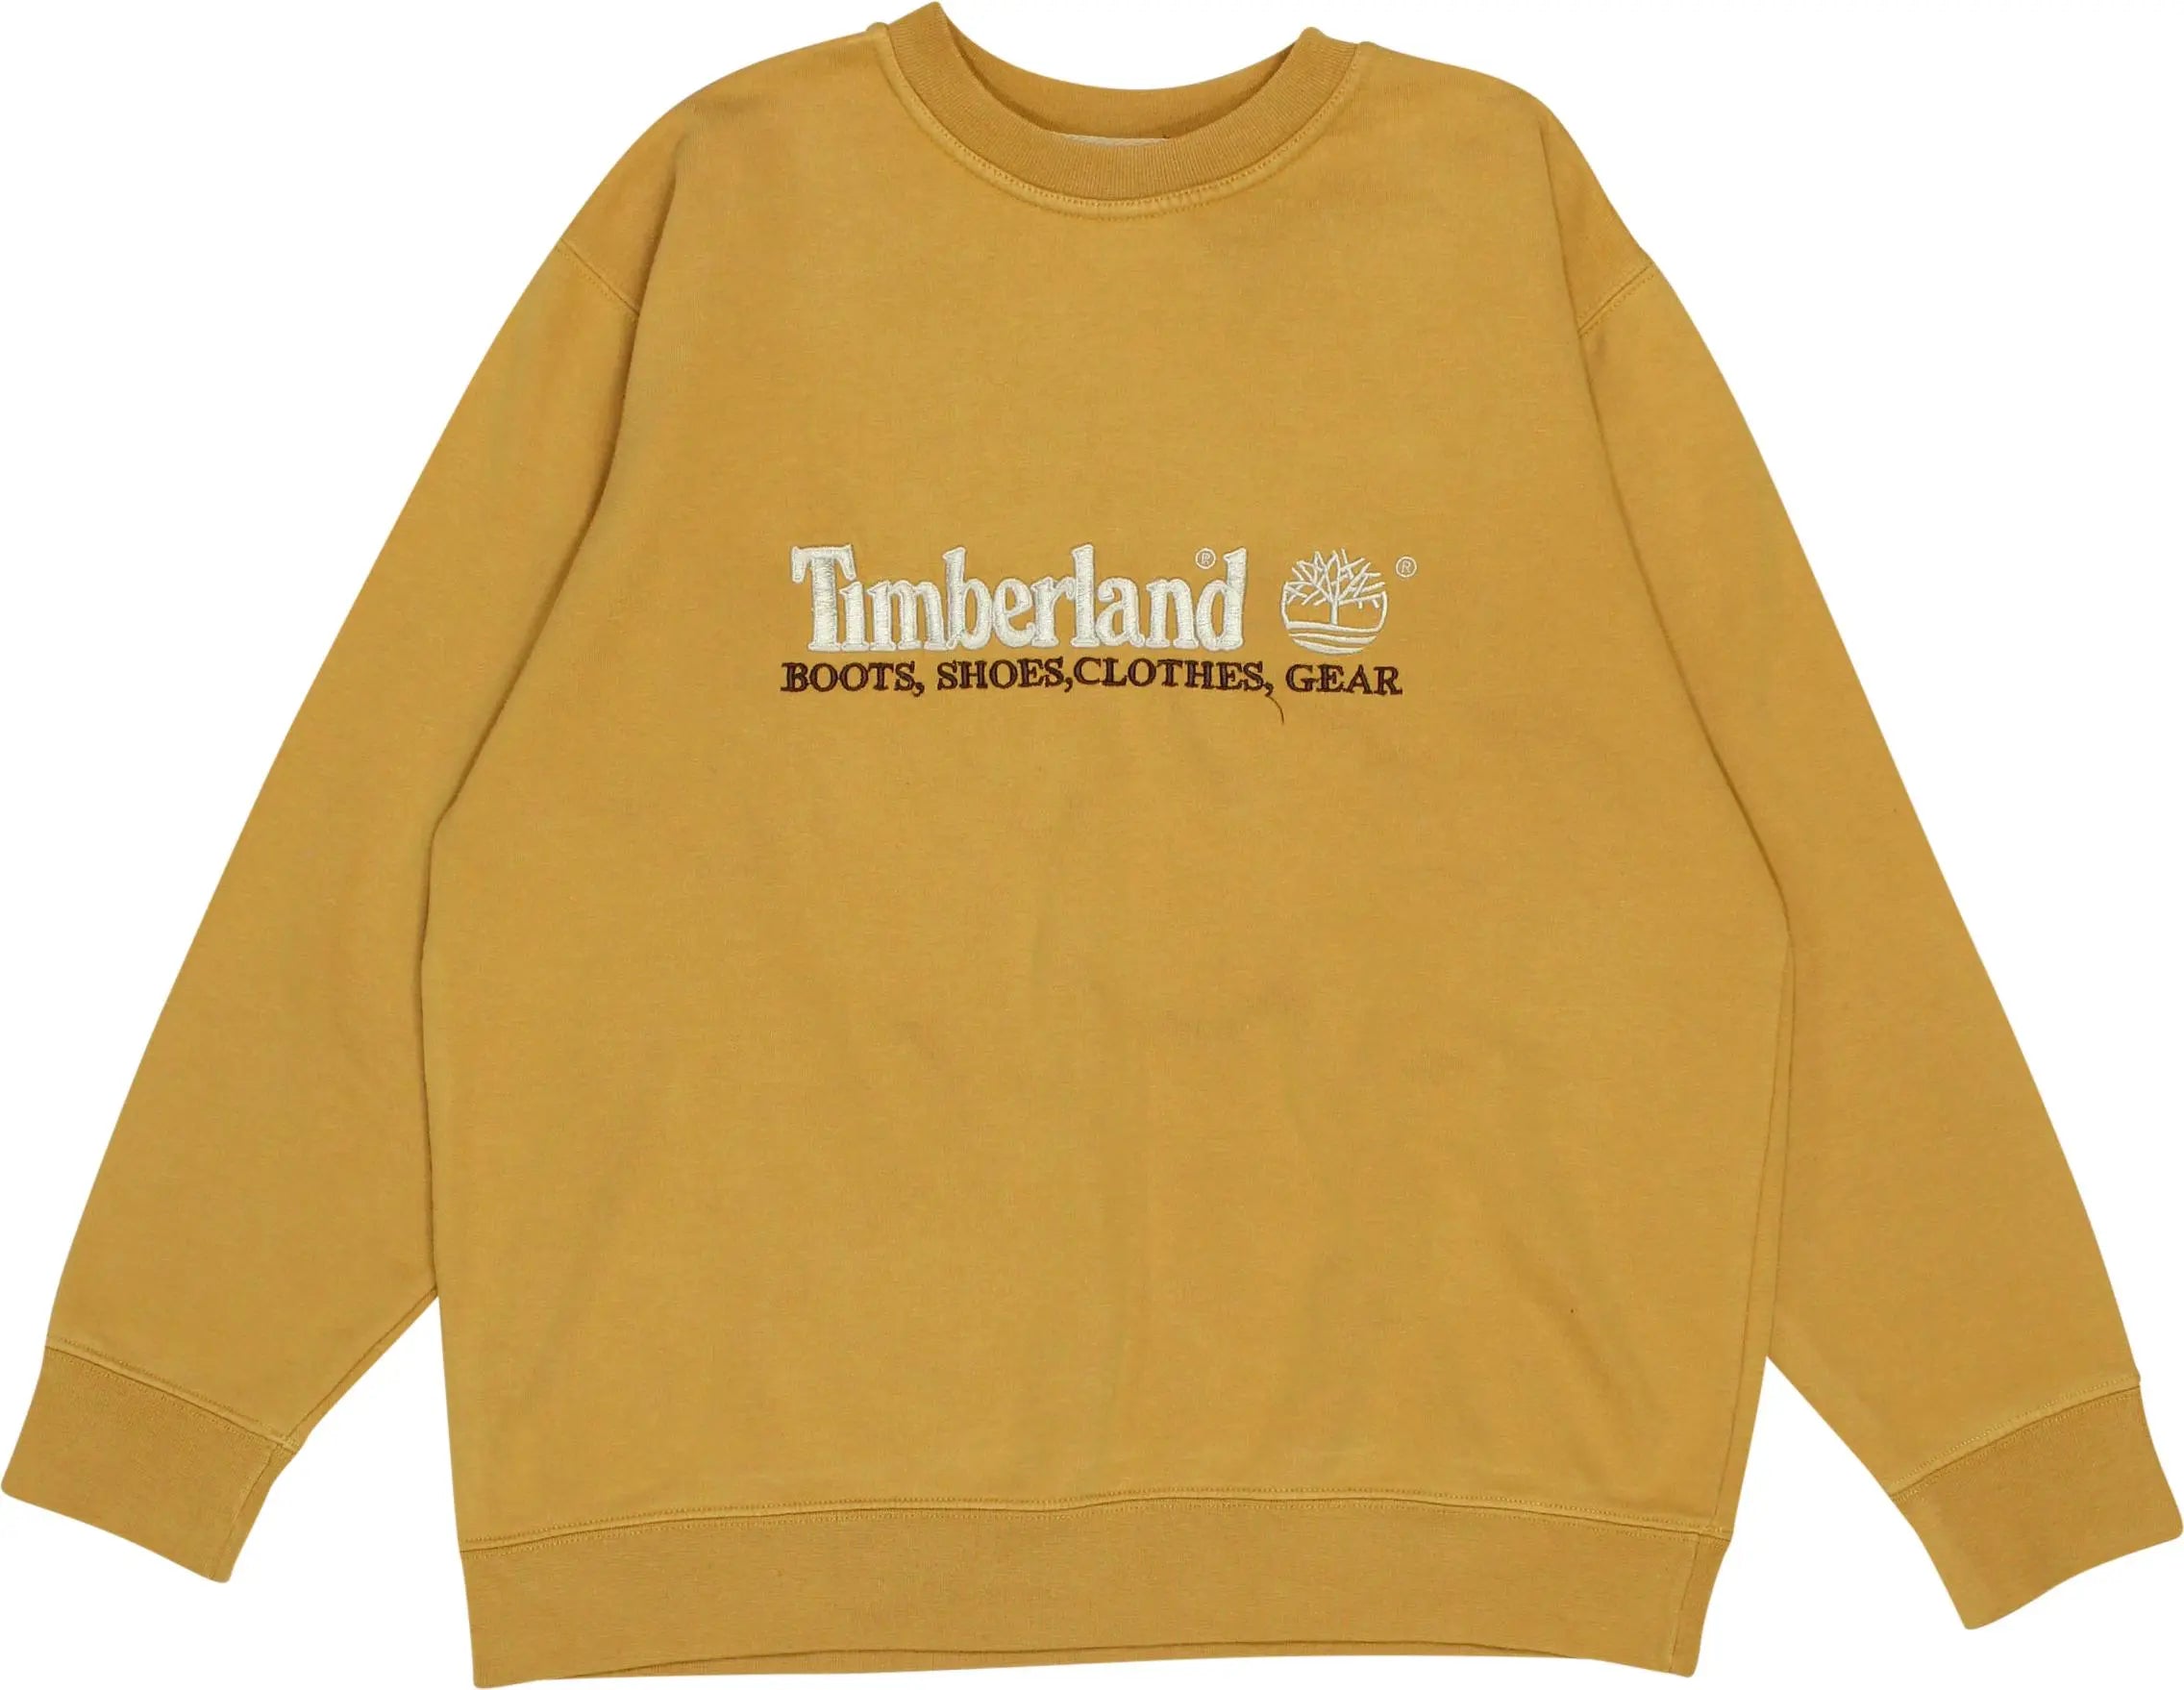 Timberland - Yellow Sweatshirt by Timberland- ThriftTale.com - Vintage and second handclothing